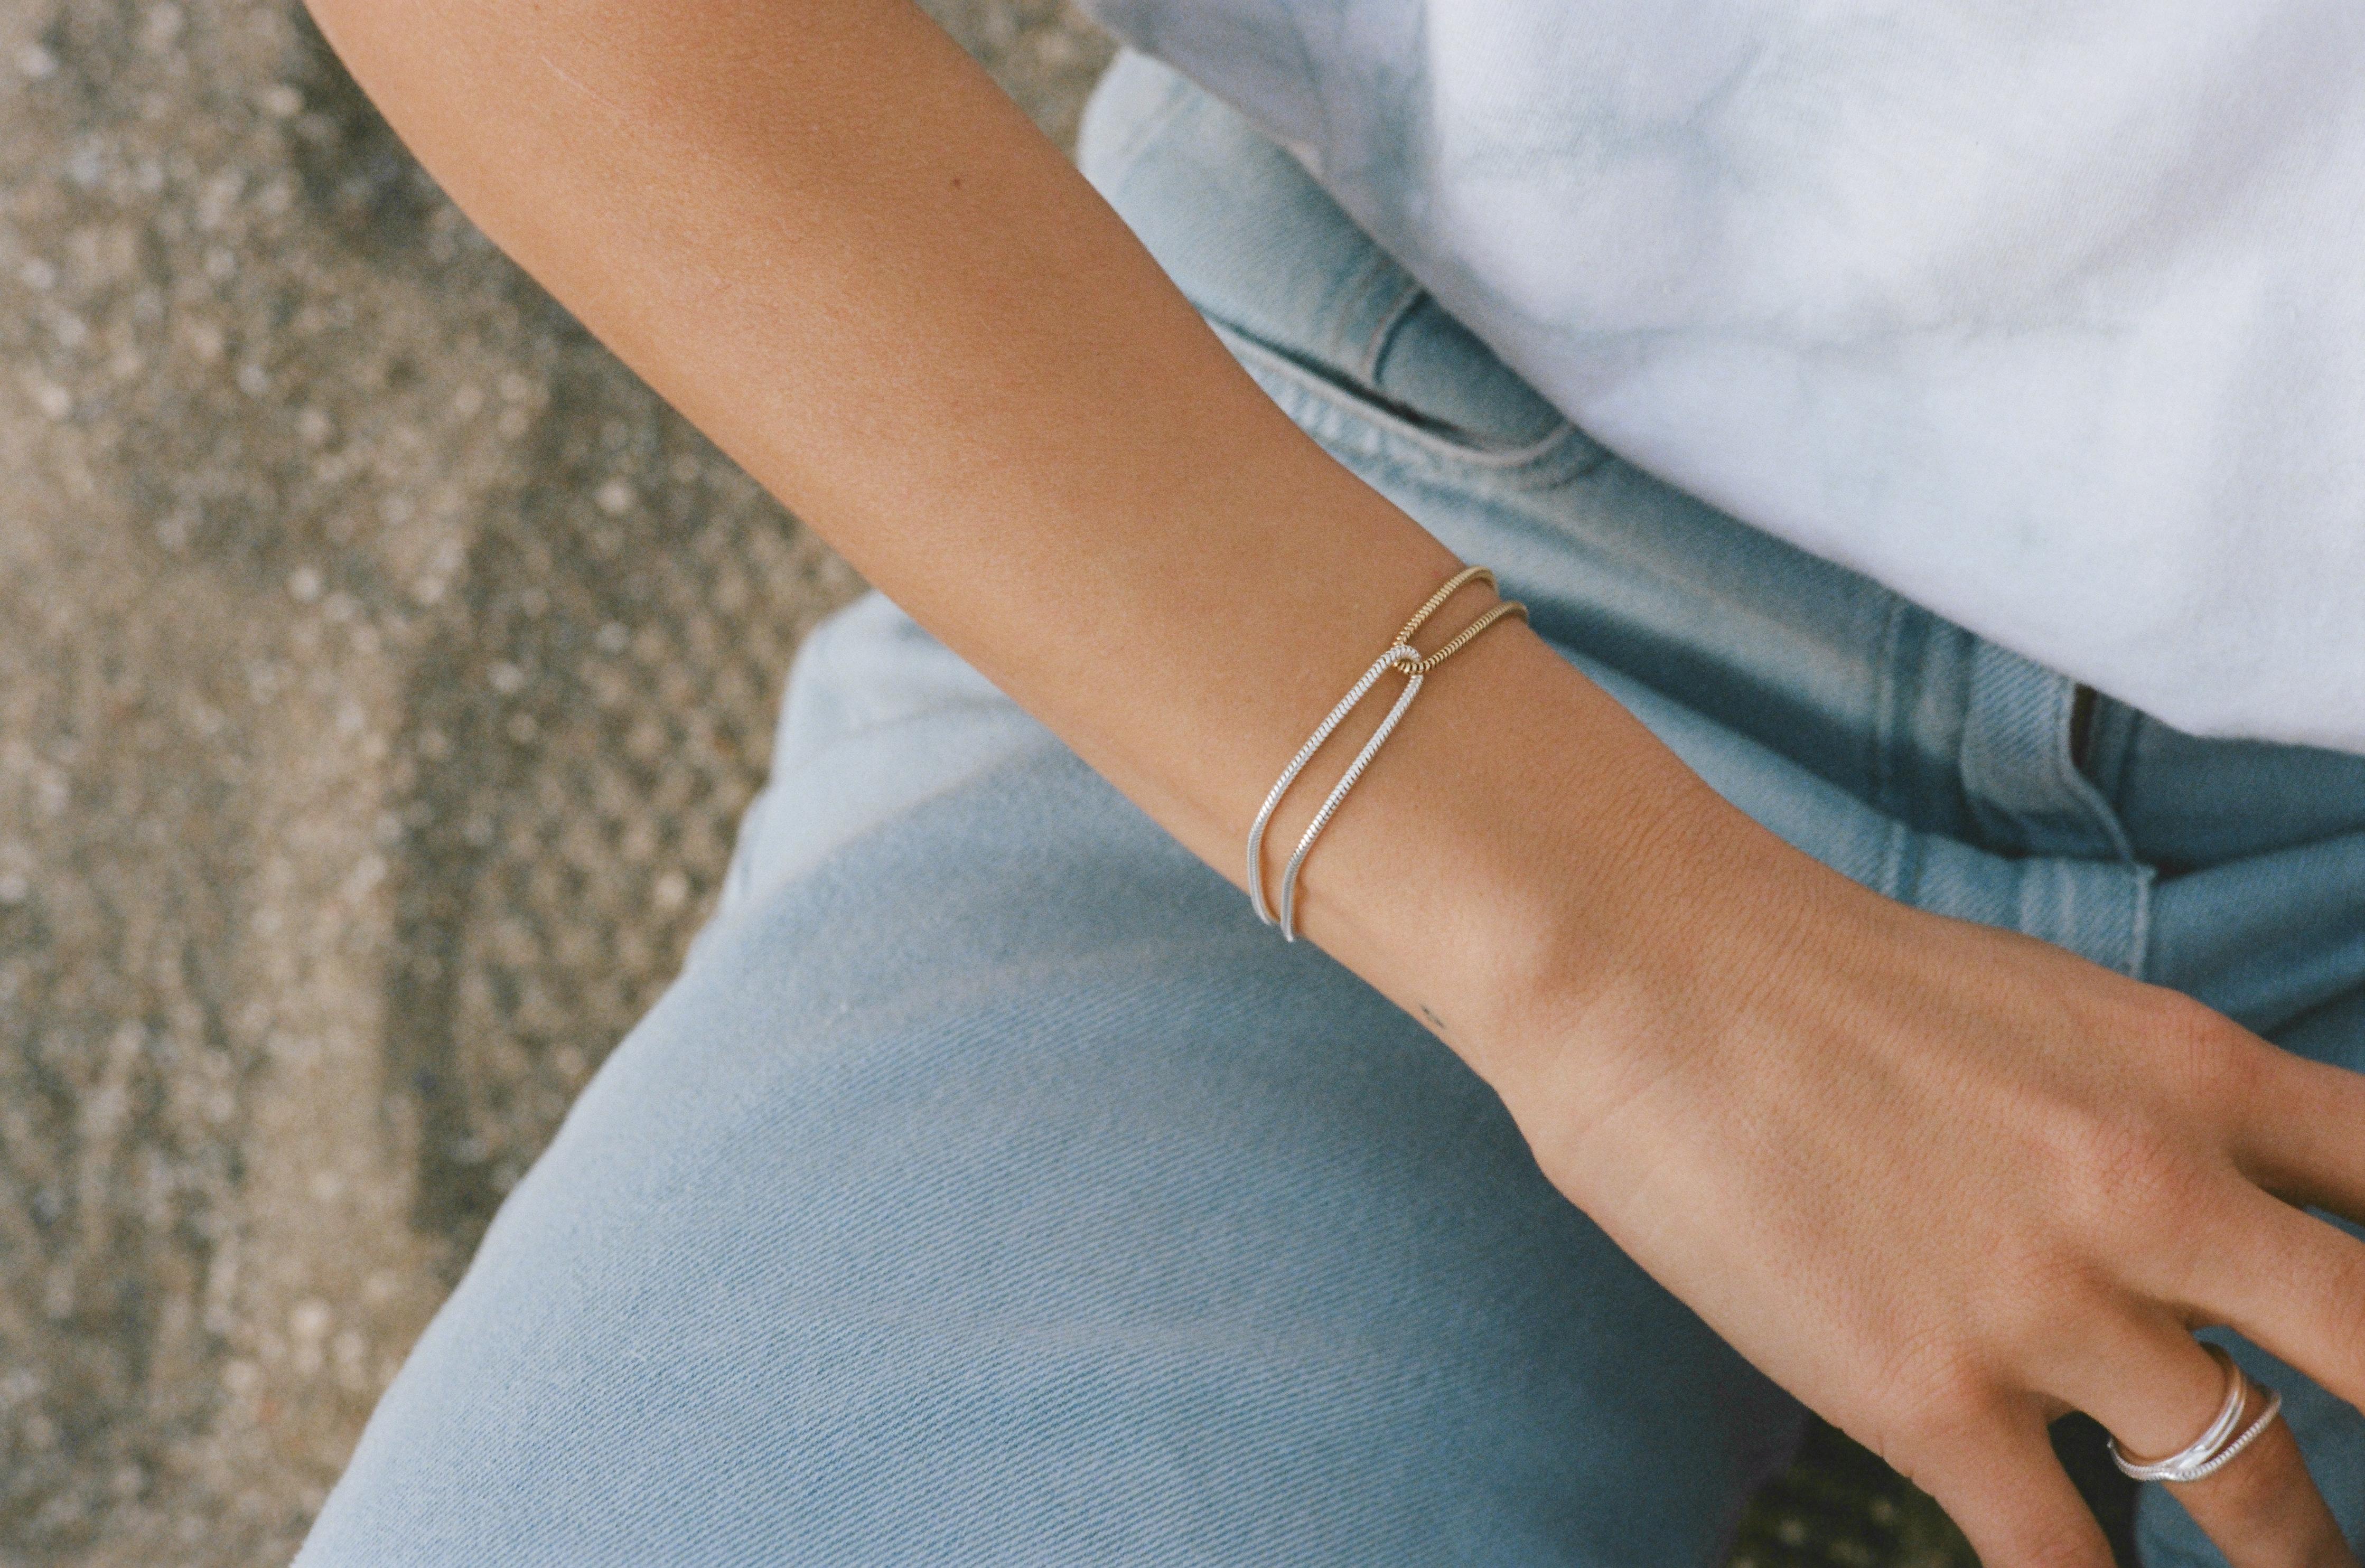 This bracelet consists of two chains, one silver and one yellow gold plated, looped through each other. This is a very graceful piece inspired by nature's delicate shapes and movement, bringing elegance to any outfit.

Hand-crafted by local skilled